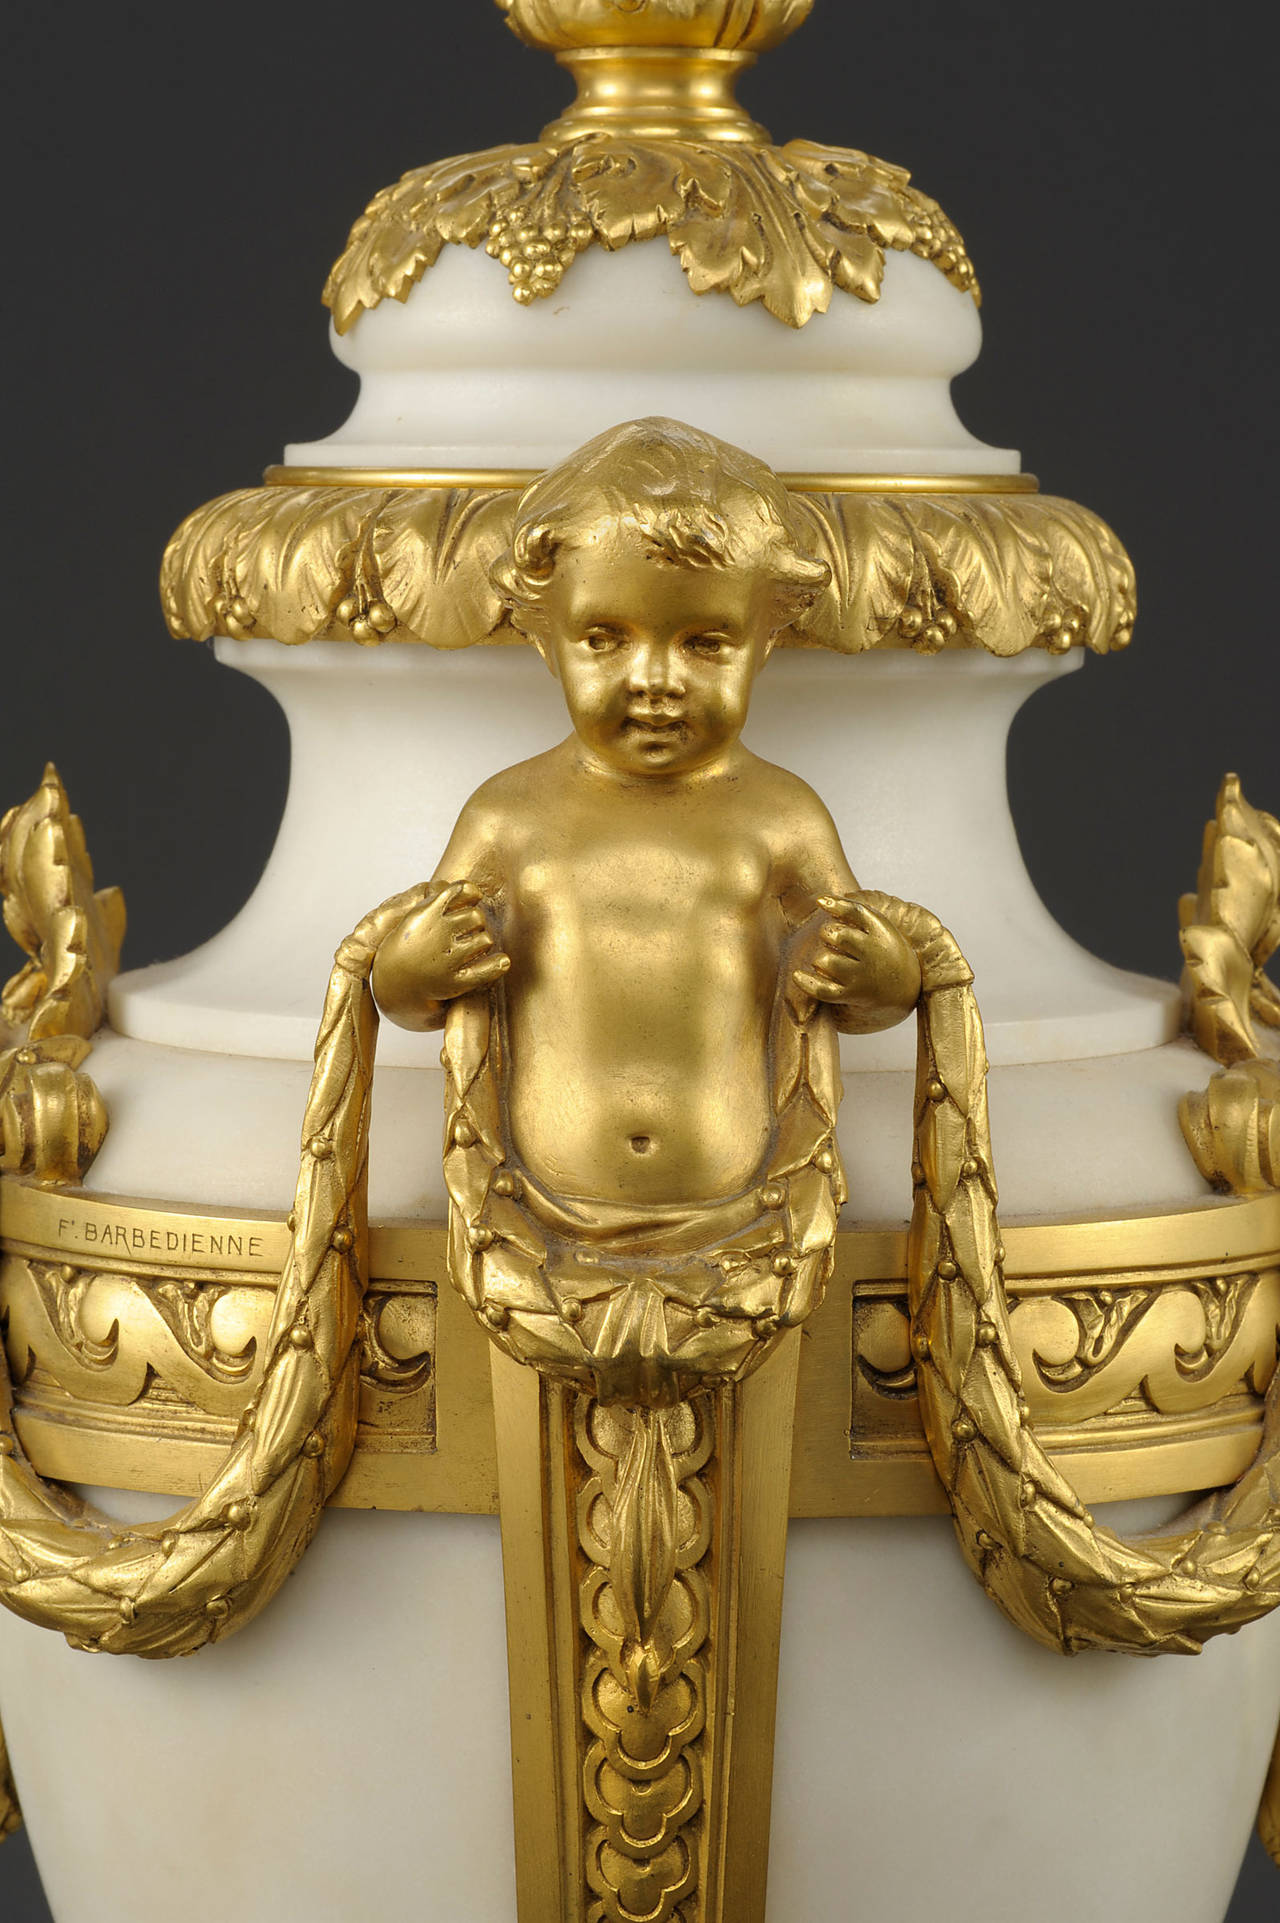 A pair of urns in the Louis XVI manner signed by Ferdinand Barbedienne

Constructed in carved white Carrara marble, and ormolu; rising from square stepped bases, the baluster form urns dressed with running laurel leaf bands in ormolu: addorsed